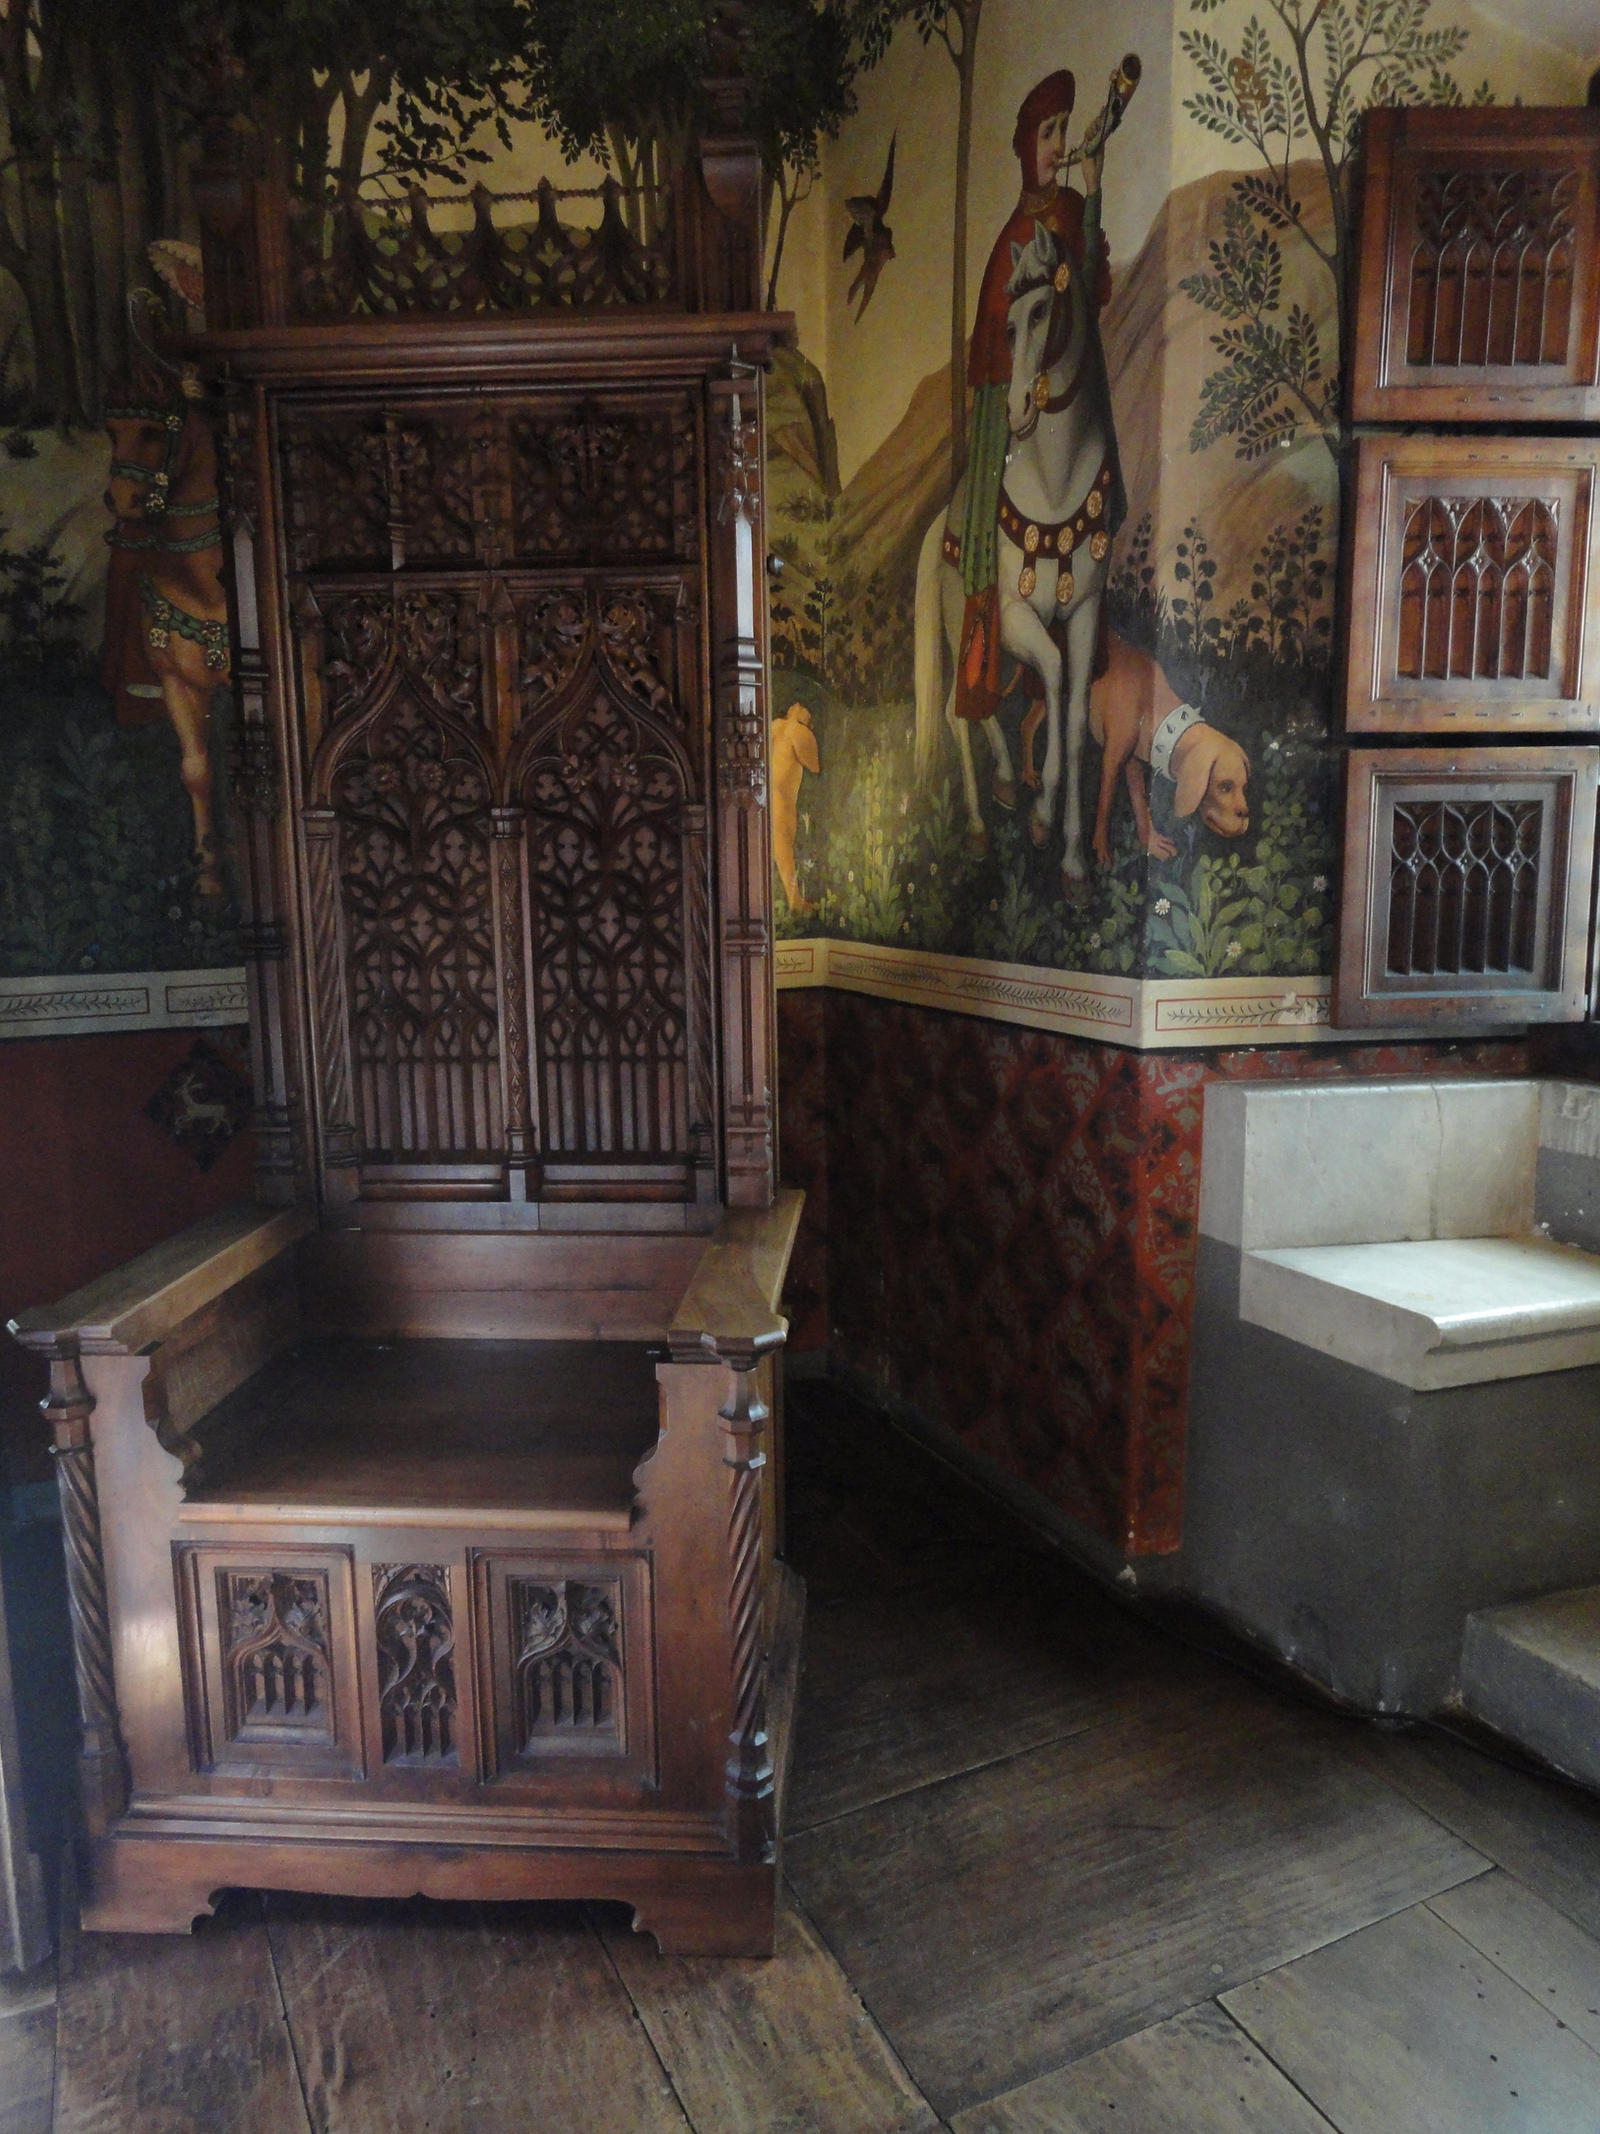 Throne chair in castle room